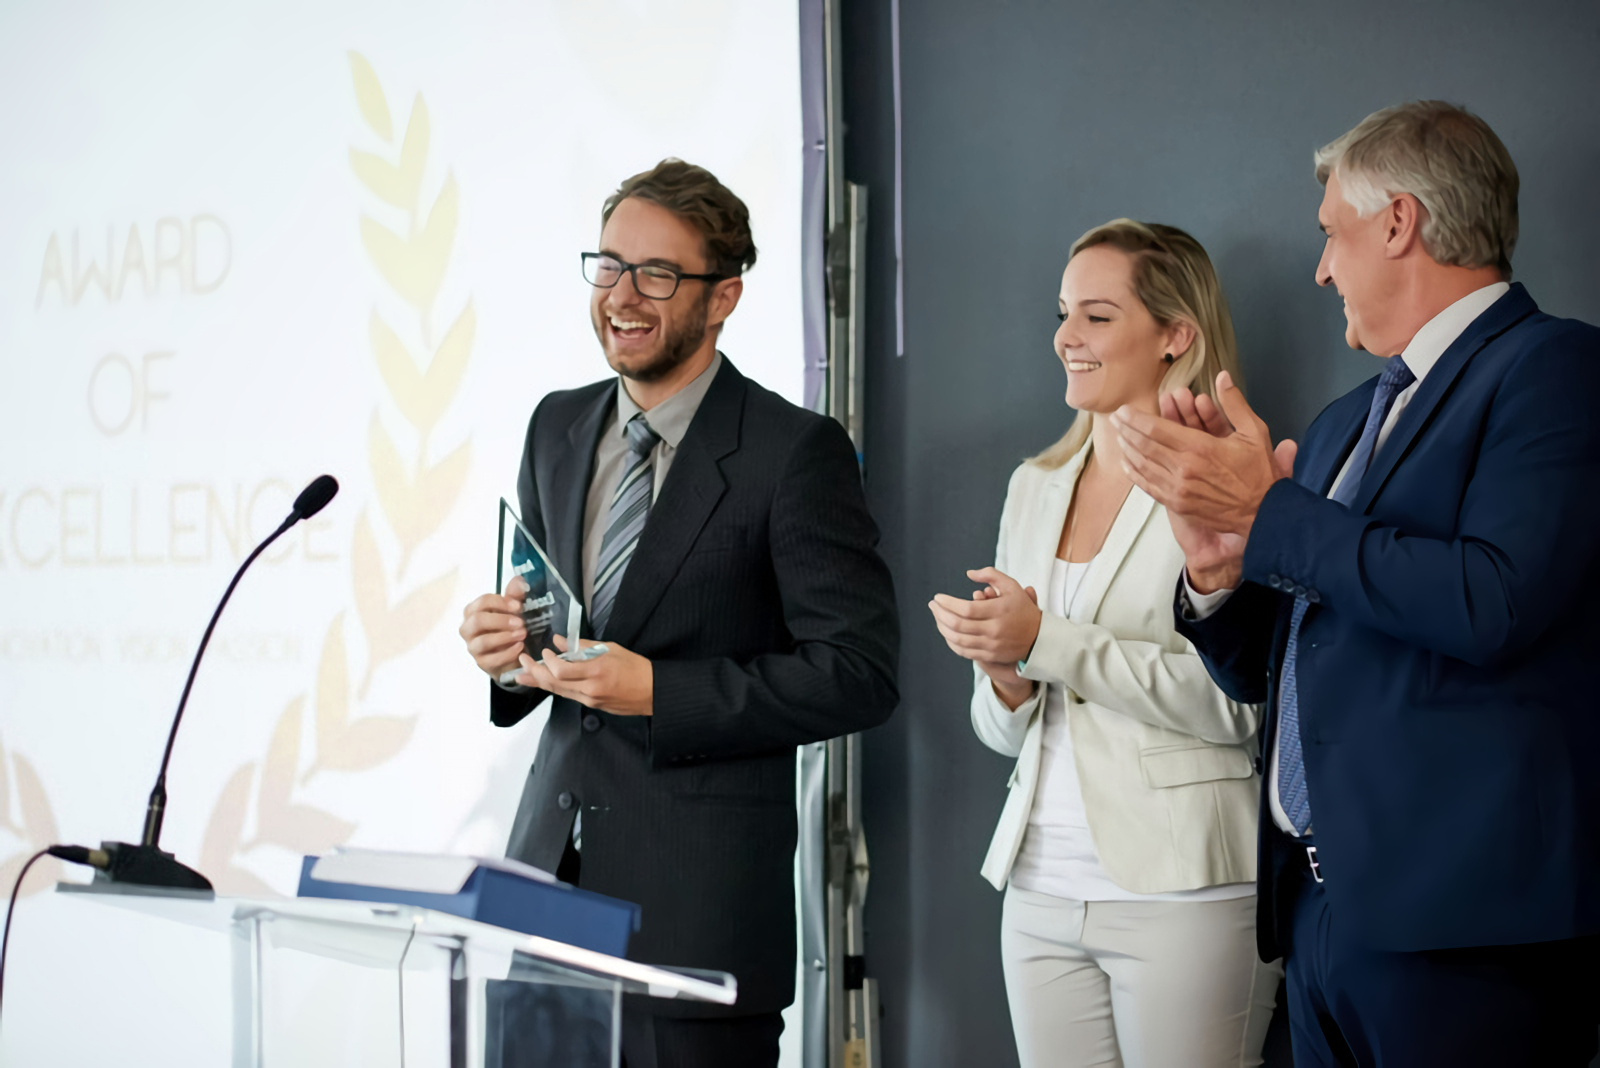 Award Ceremony Ideas For Your Virtual Events